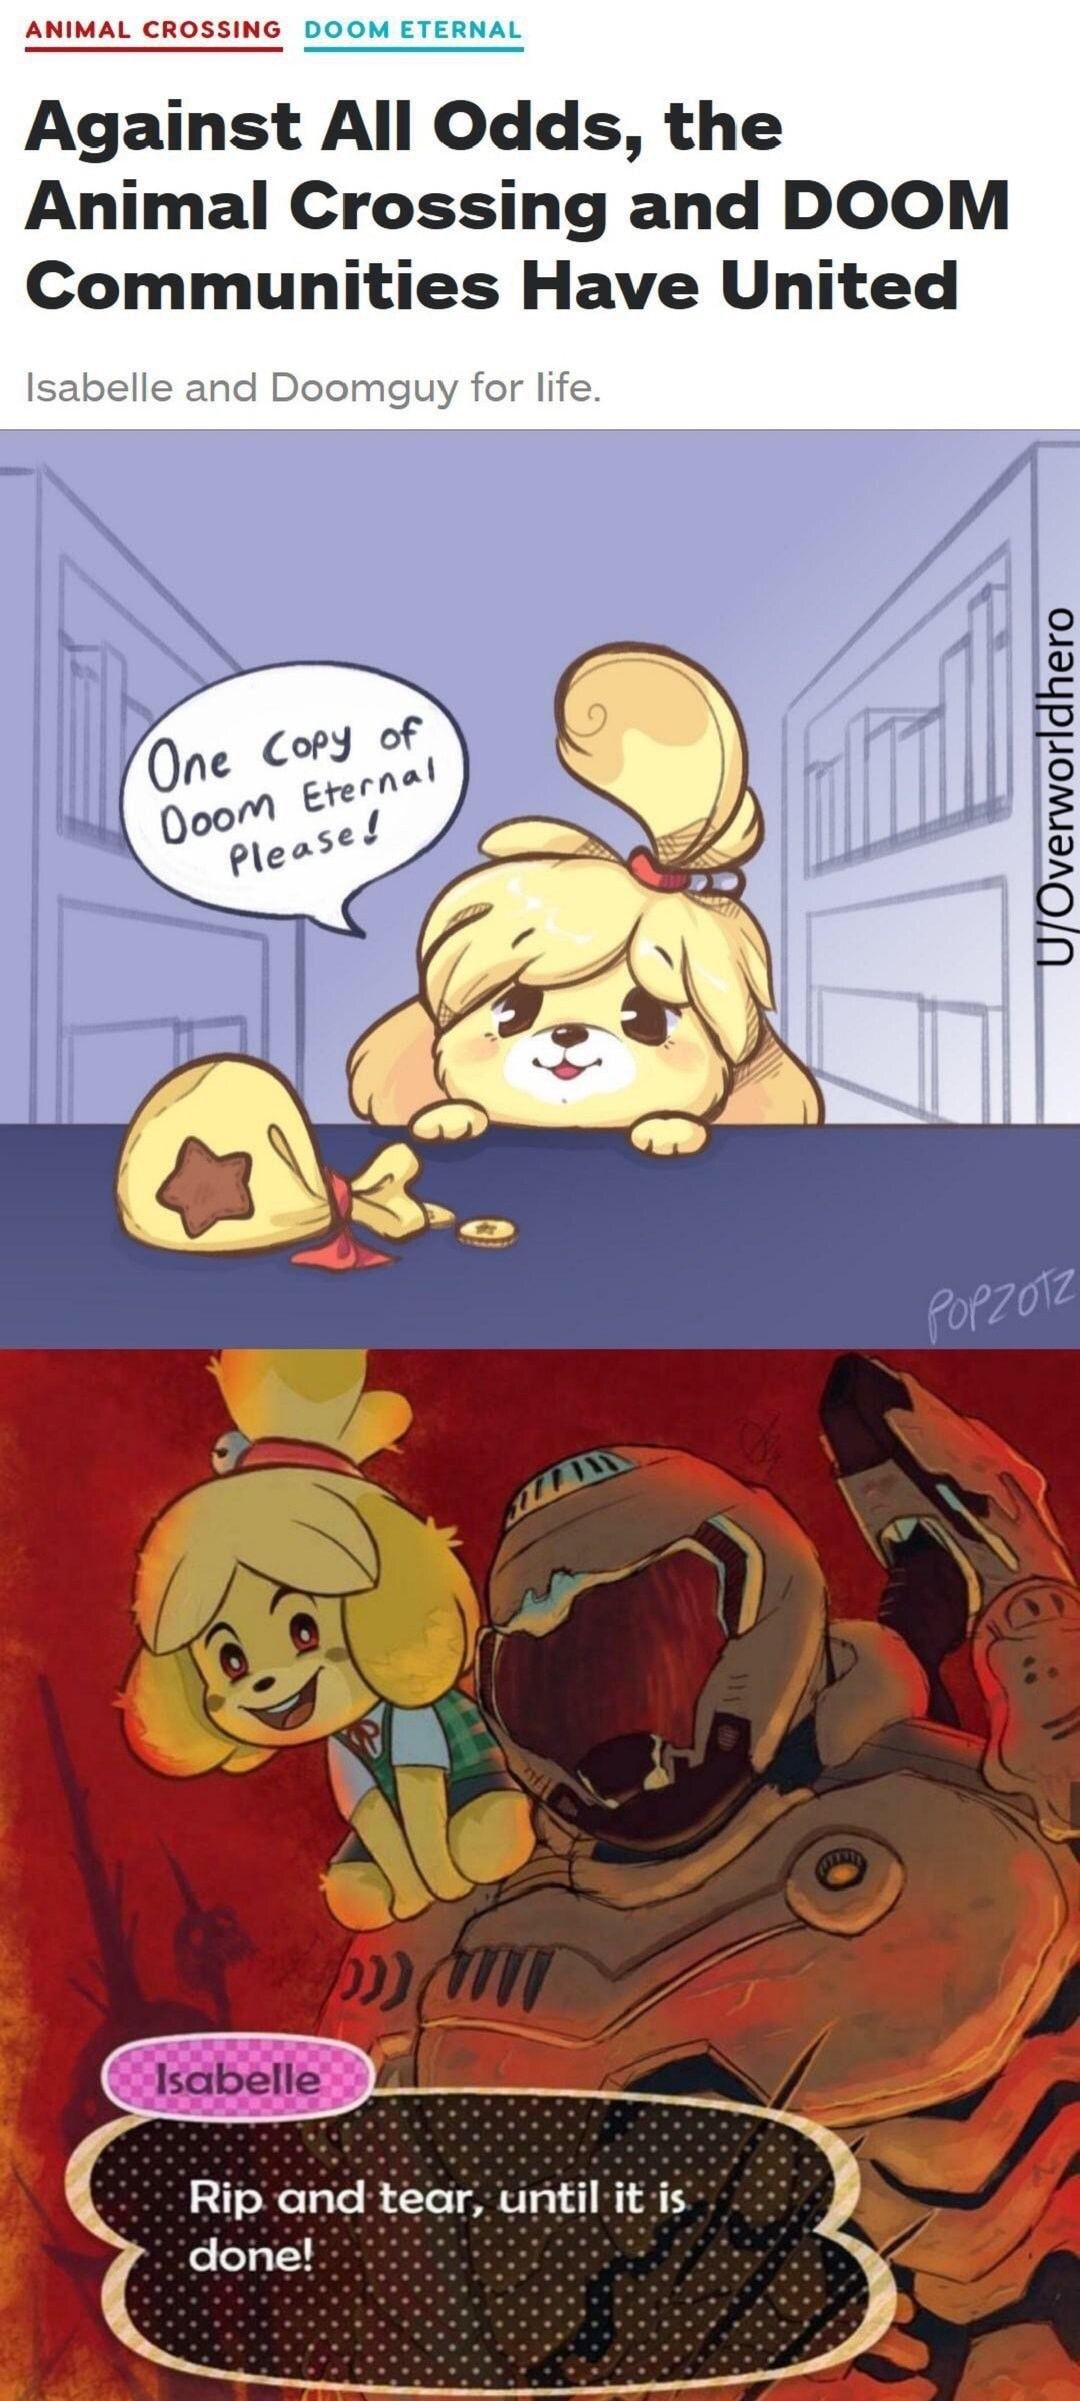 Isabelle as a playable character in the new DOOM